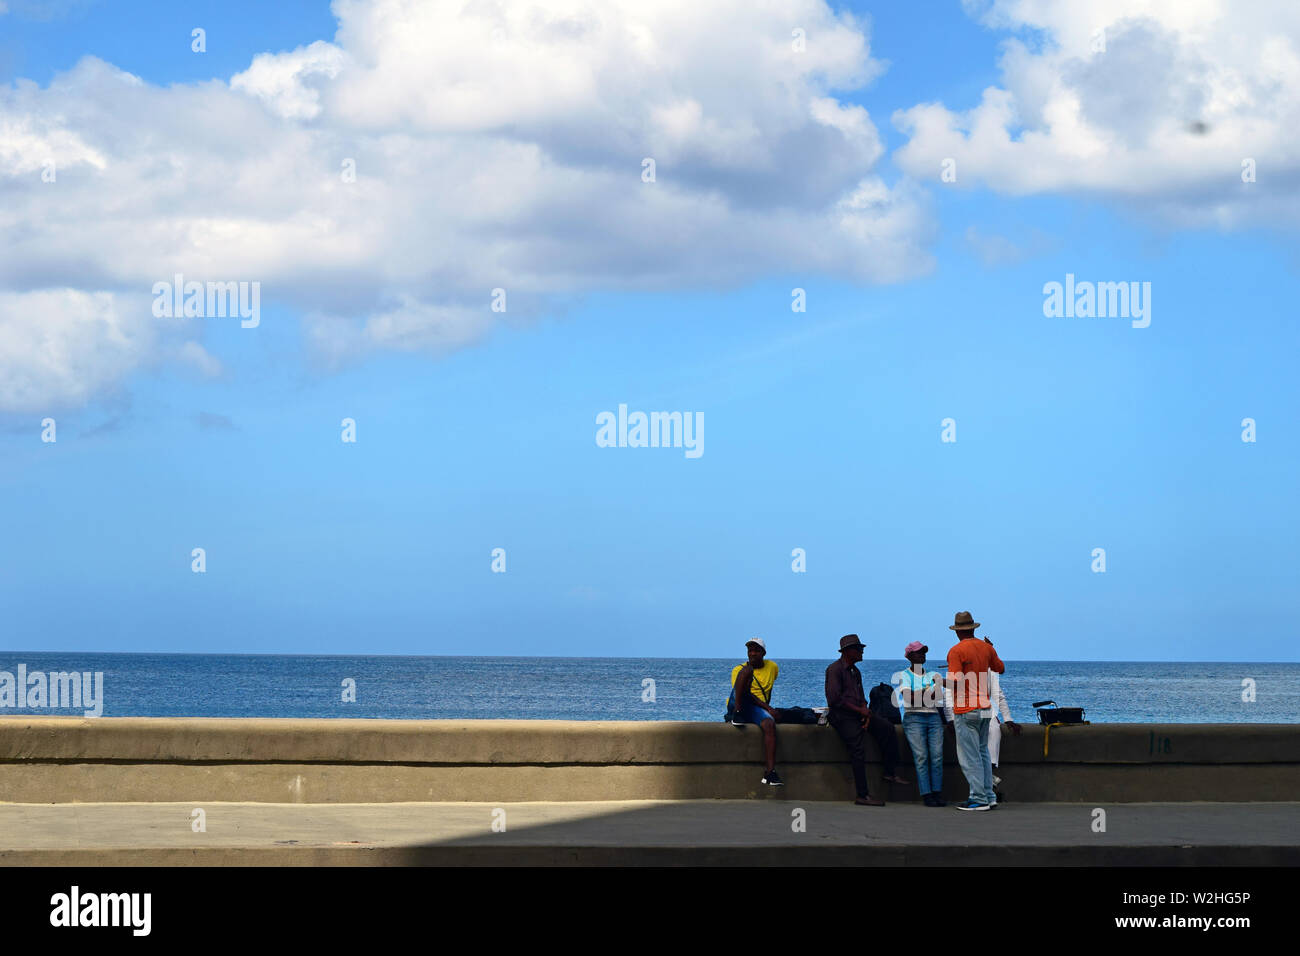 Cuba, Havana, February 10, 2018: a typical day in one of the streets of Havana, when people take a break seated against seascape Stock Photo